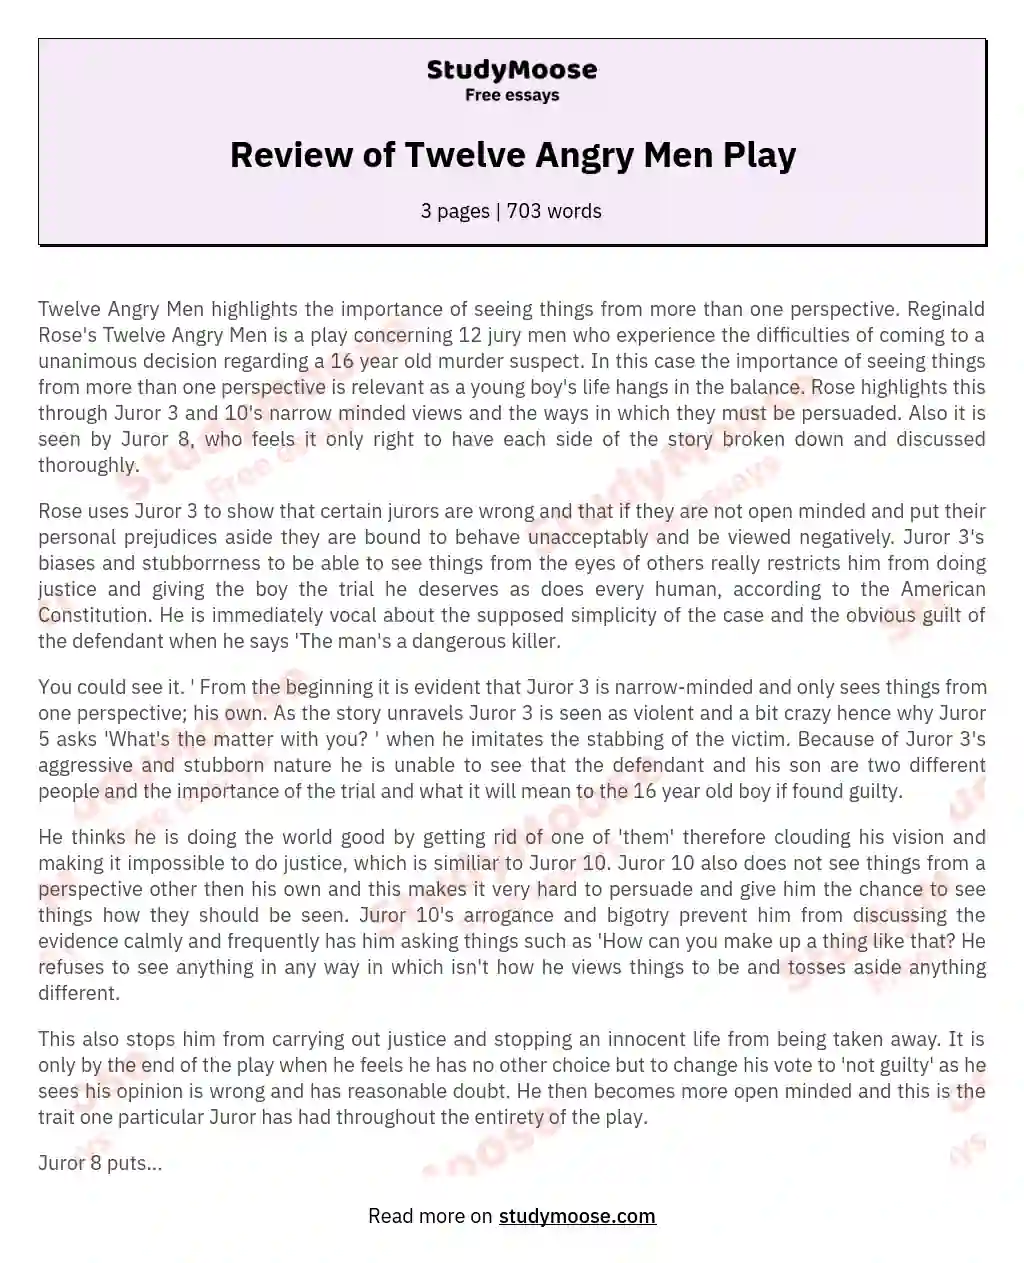 The Significance of Diverse Perspectives in "Twelve Angry Men" essay